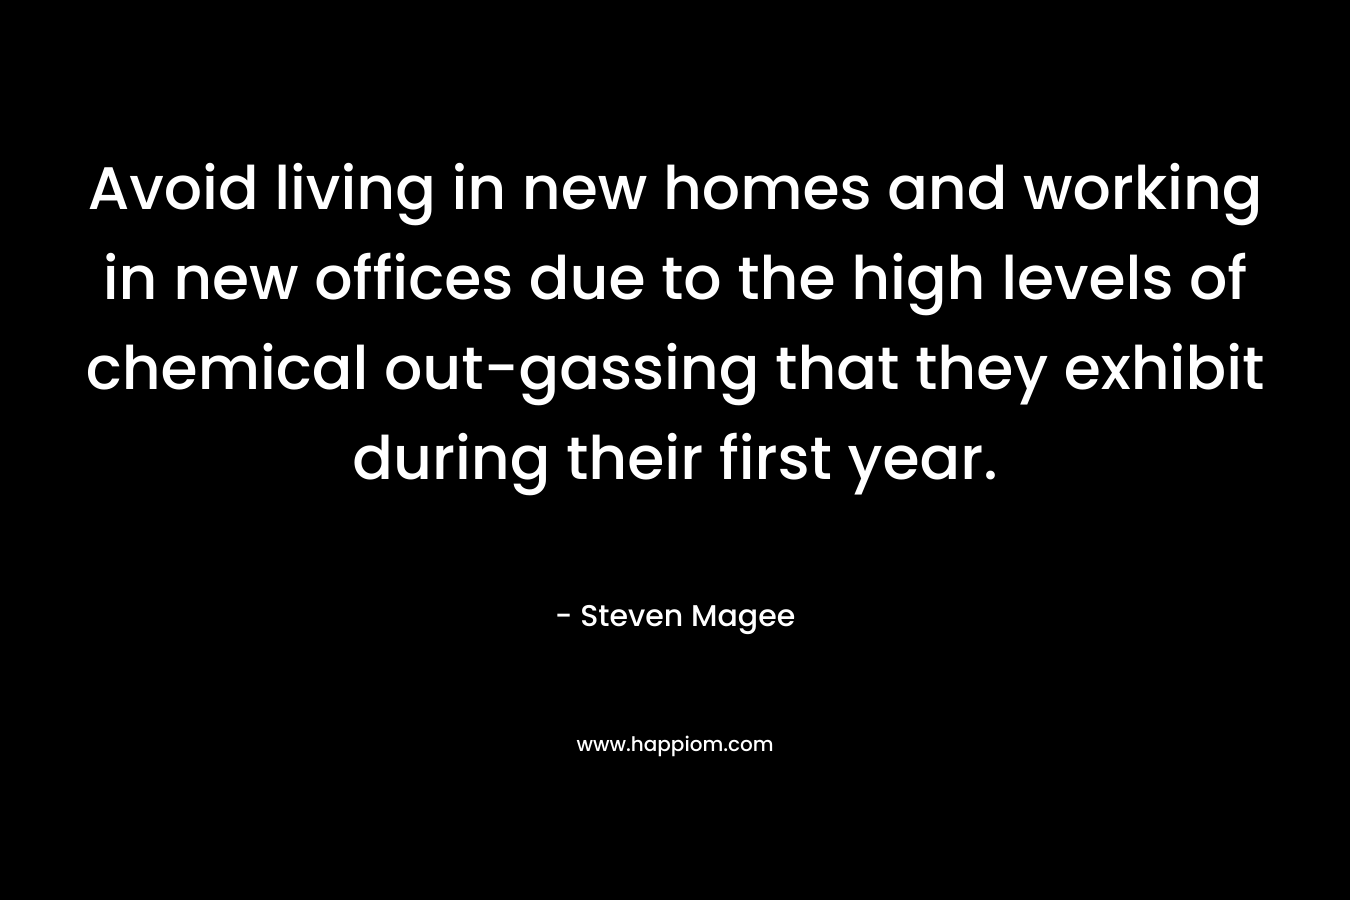 Avoid living in new homes and working in new offices due to the high levels of chemical out-gassing that they exhibit during their first year.